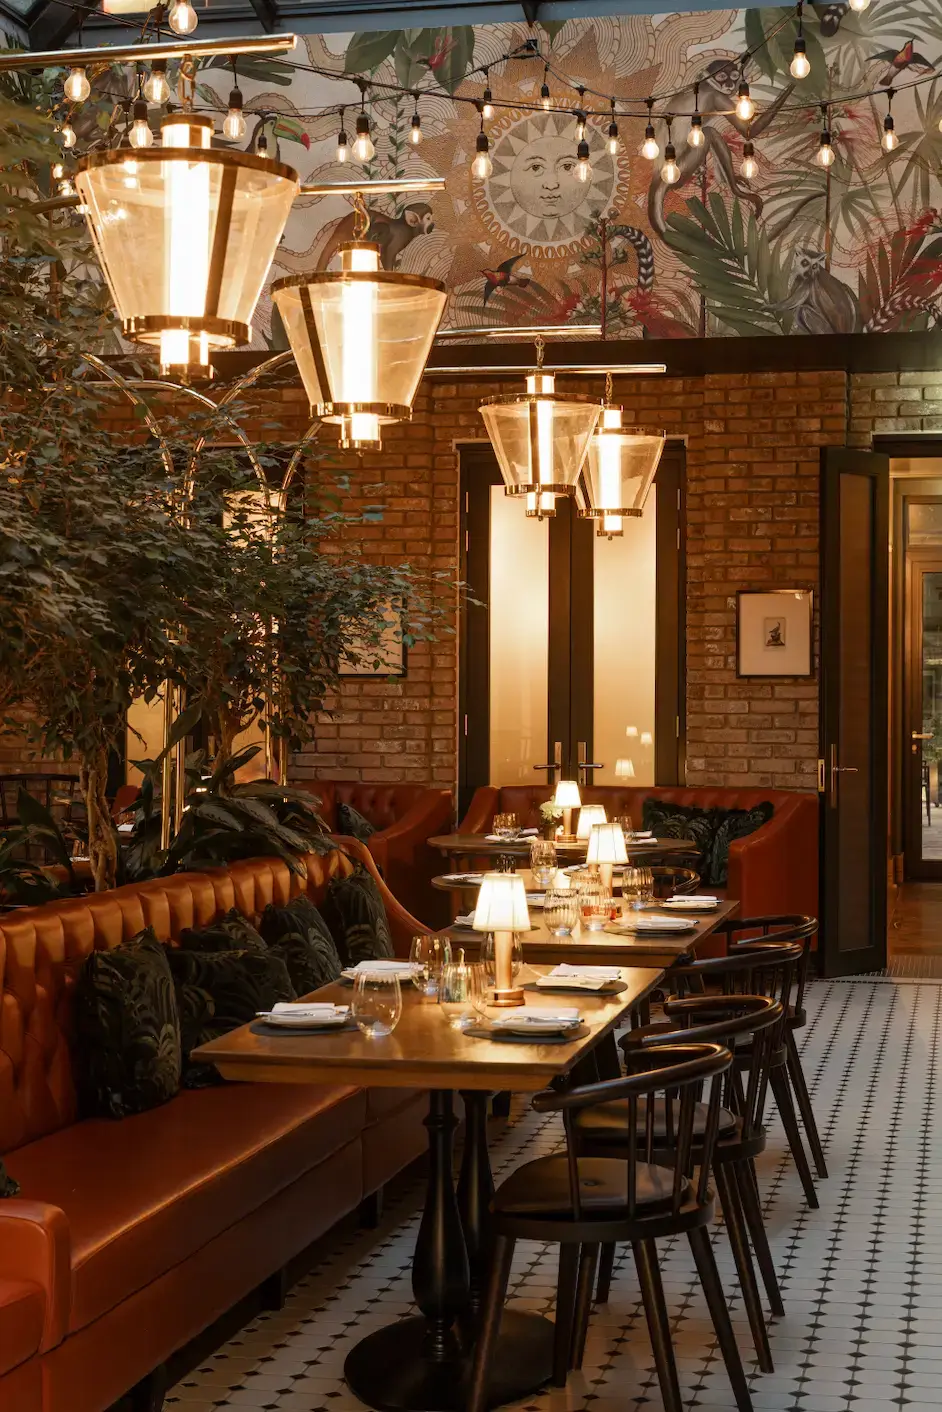 QUERCUS, Shoreditch - 30% off food every Tuesday, Friday & Saturday until 30th April